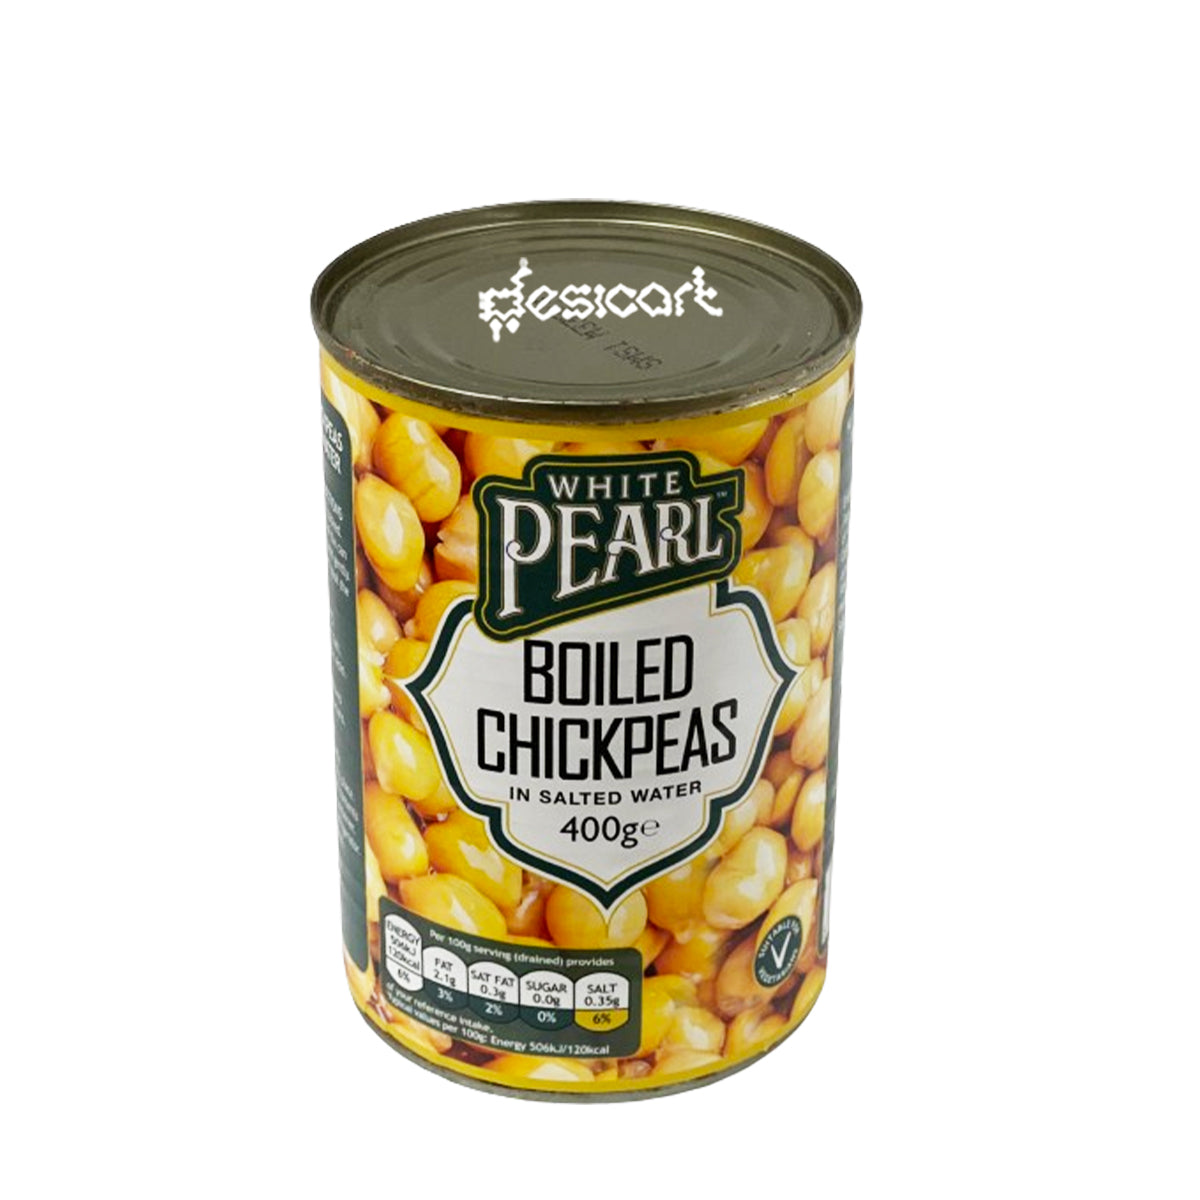 WHITEPEARL CHICK PEAS (BOILED) 400G